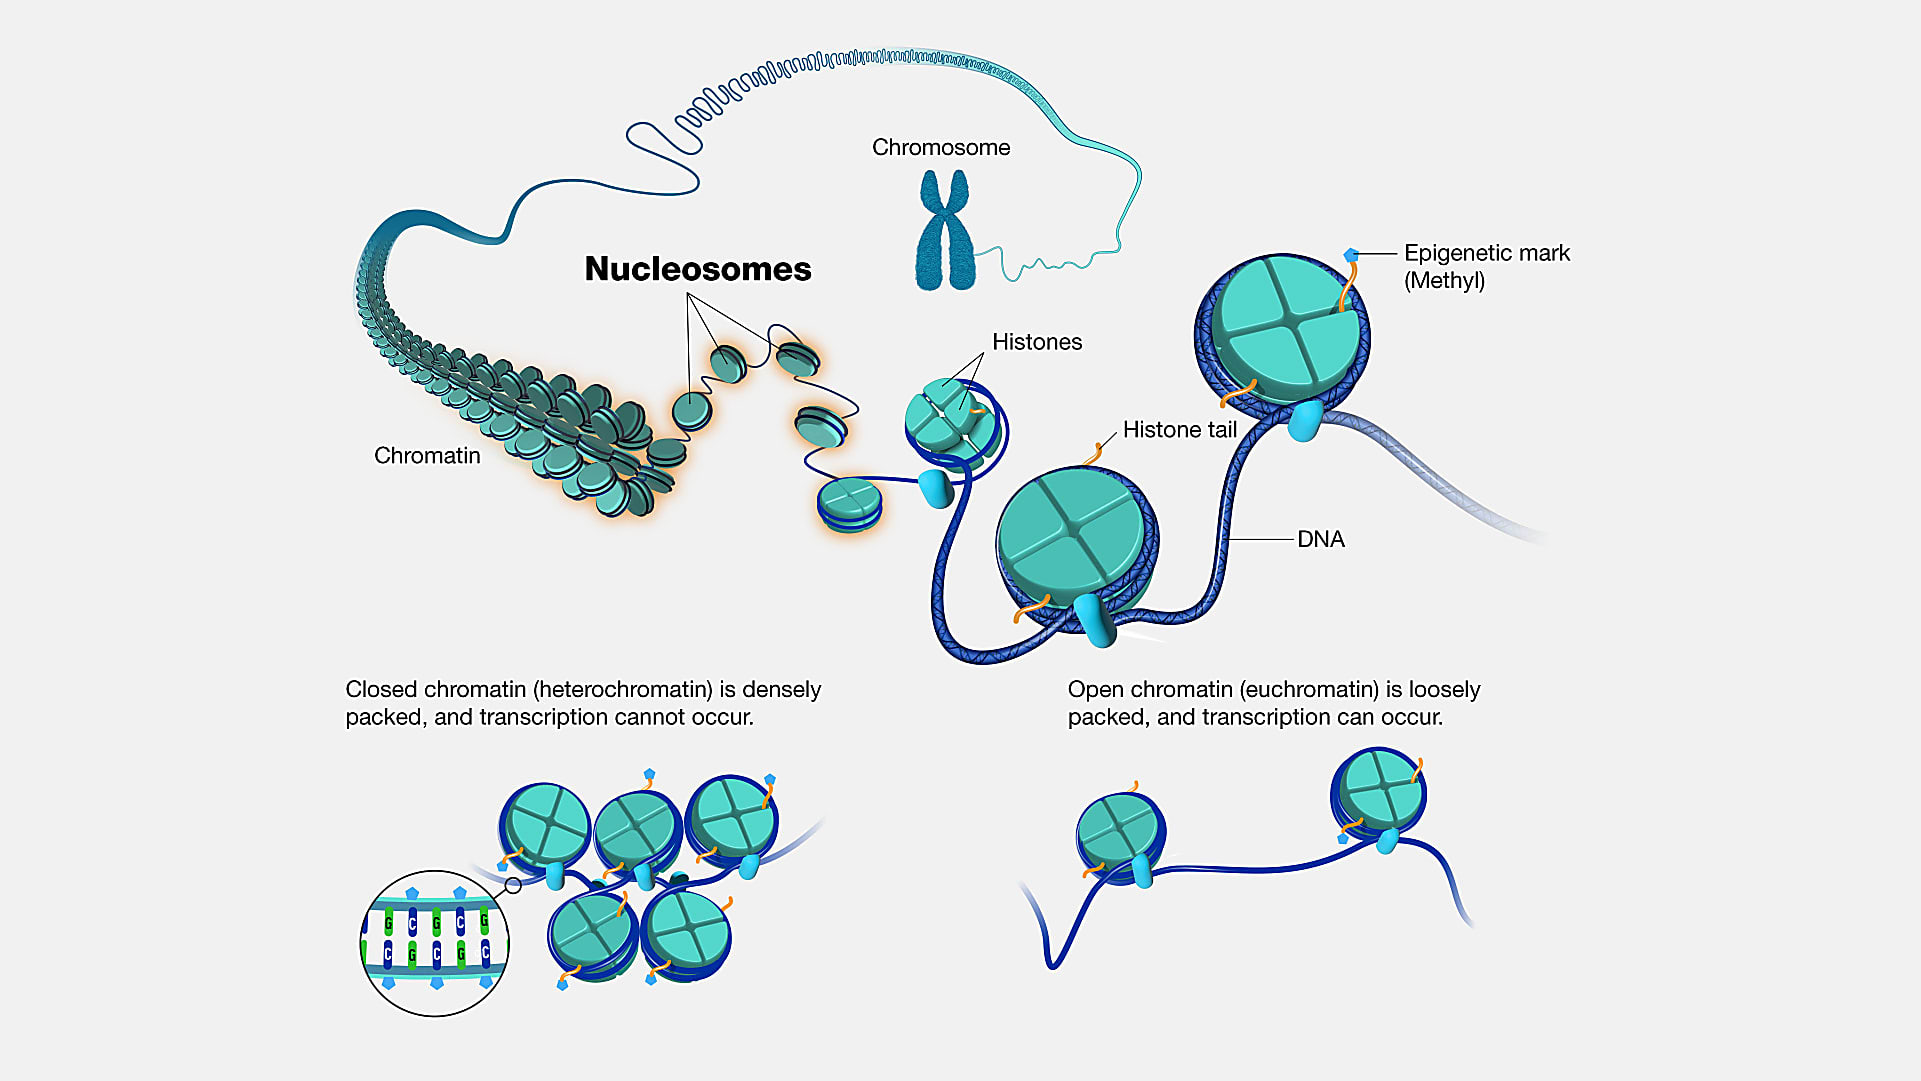 Image of chromatin packing in the nucleus. CREDIT: National Human Genome Research Institute. https://www.genome.gov/genetics-glossary/Nucleosome